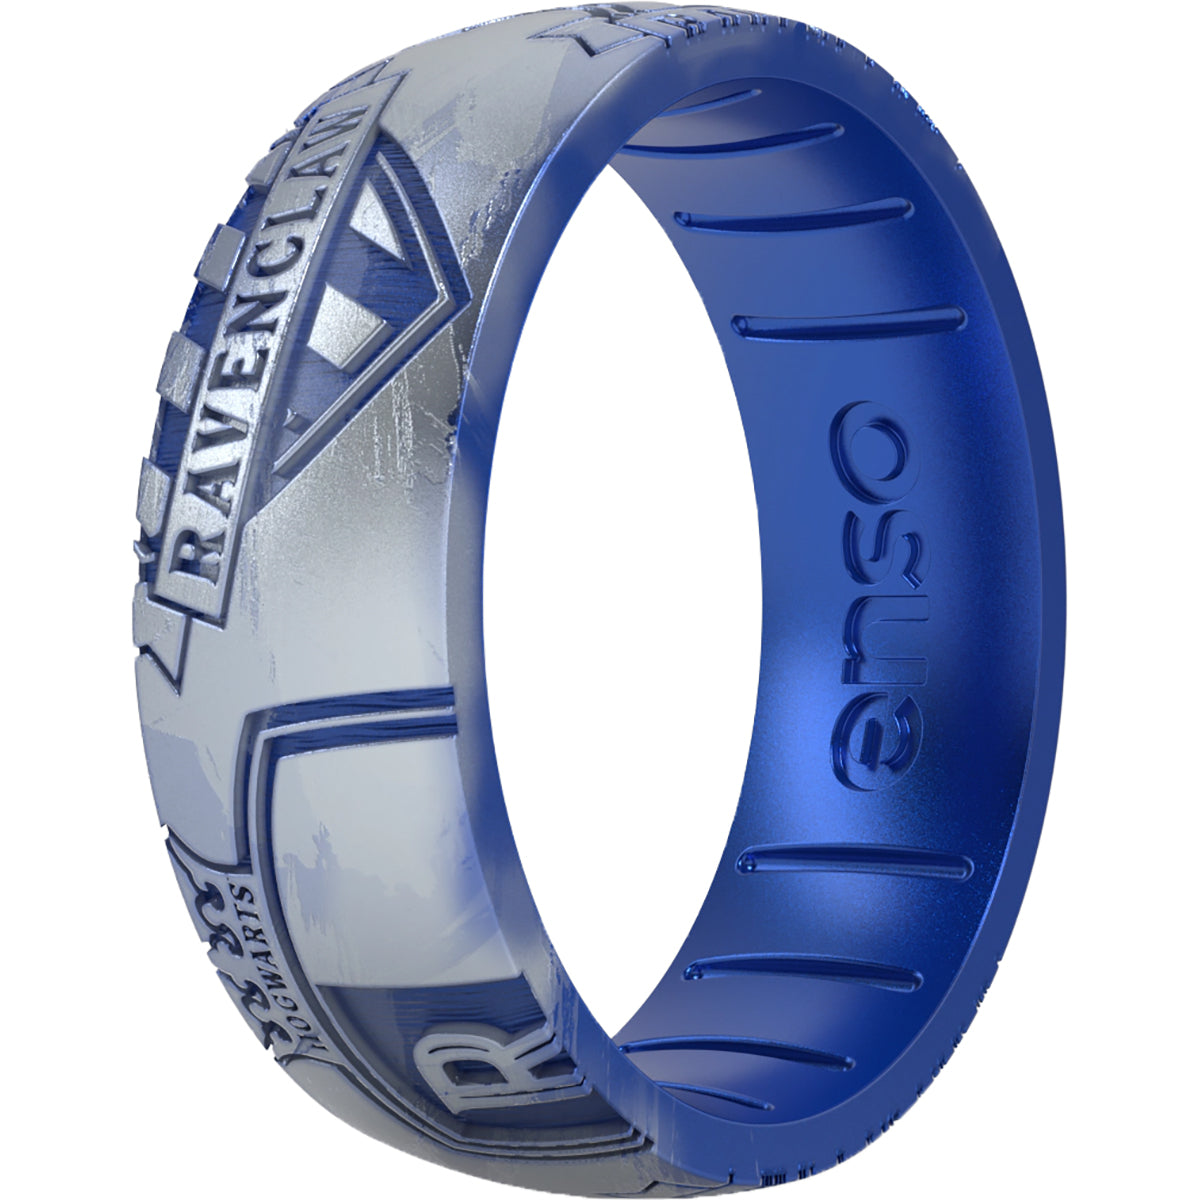 Enso Rings Classic Handcrafted Series Silicone Ring - 9 - Deep Sea